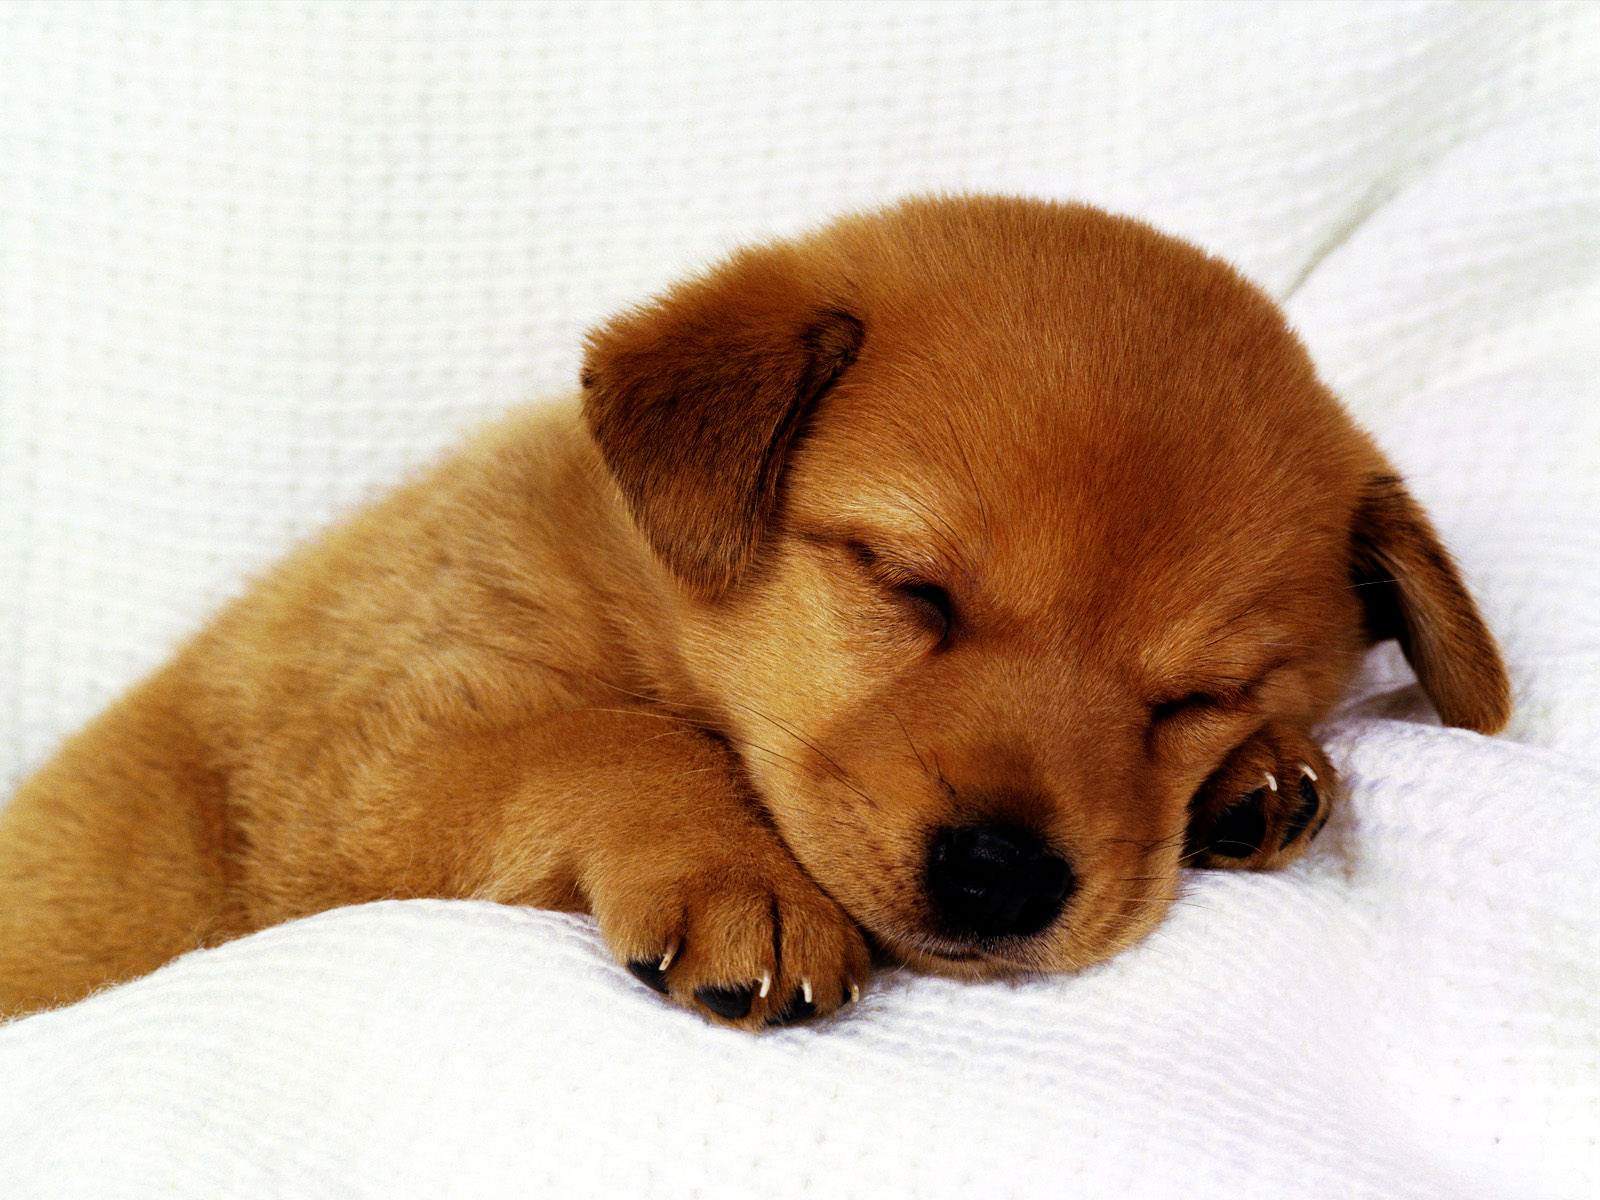 Cute Puppies HD Wallpaper Collection In